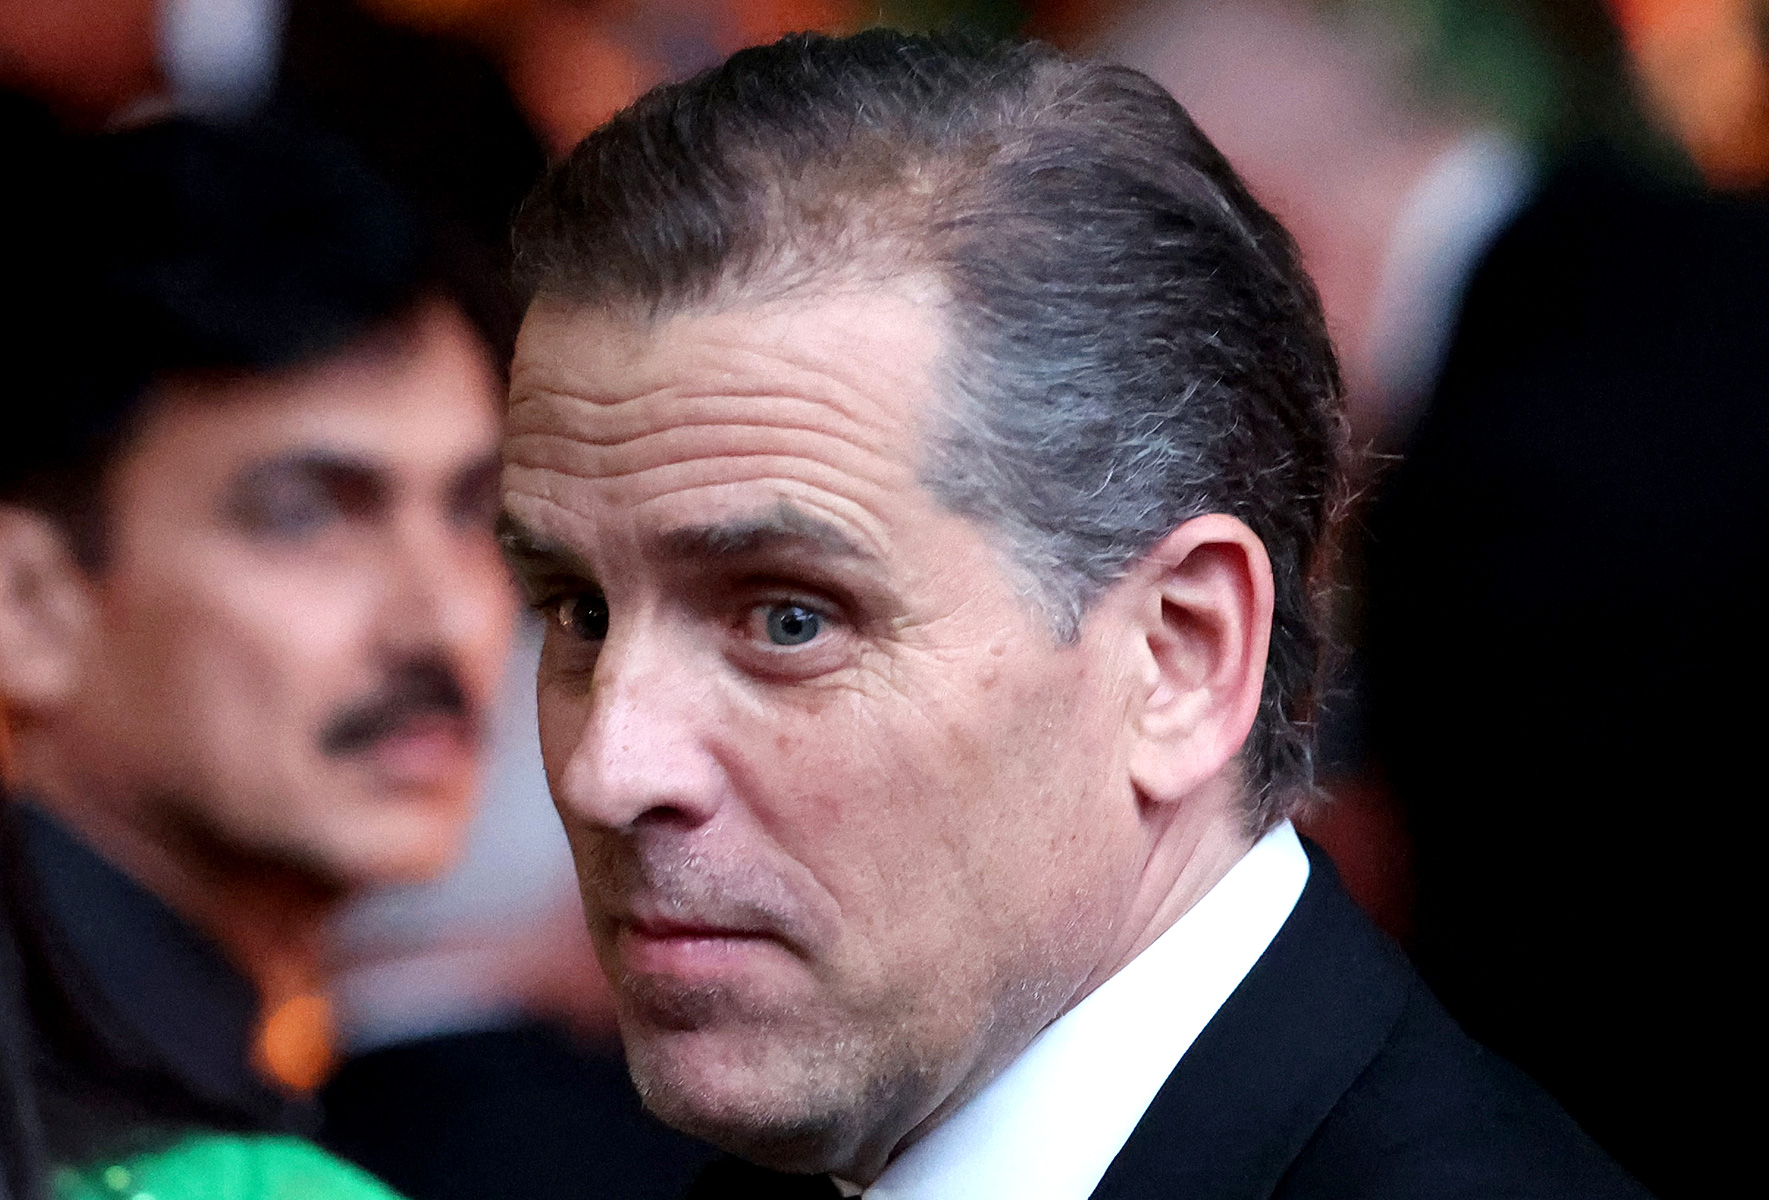 New Hunter Biden text provides “clarity” about corruption scandal: Lawyer